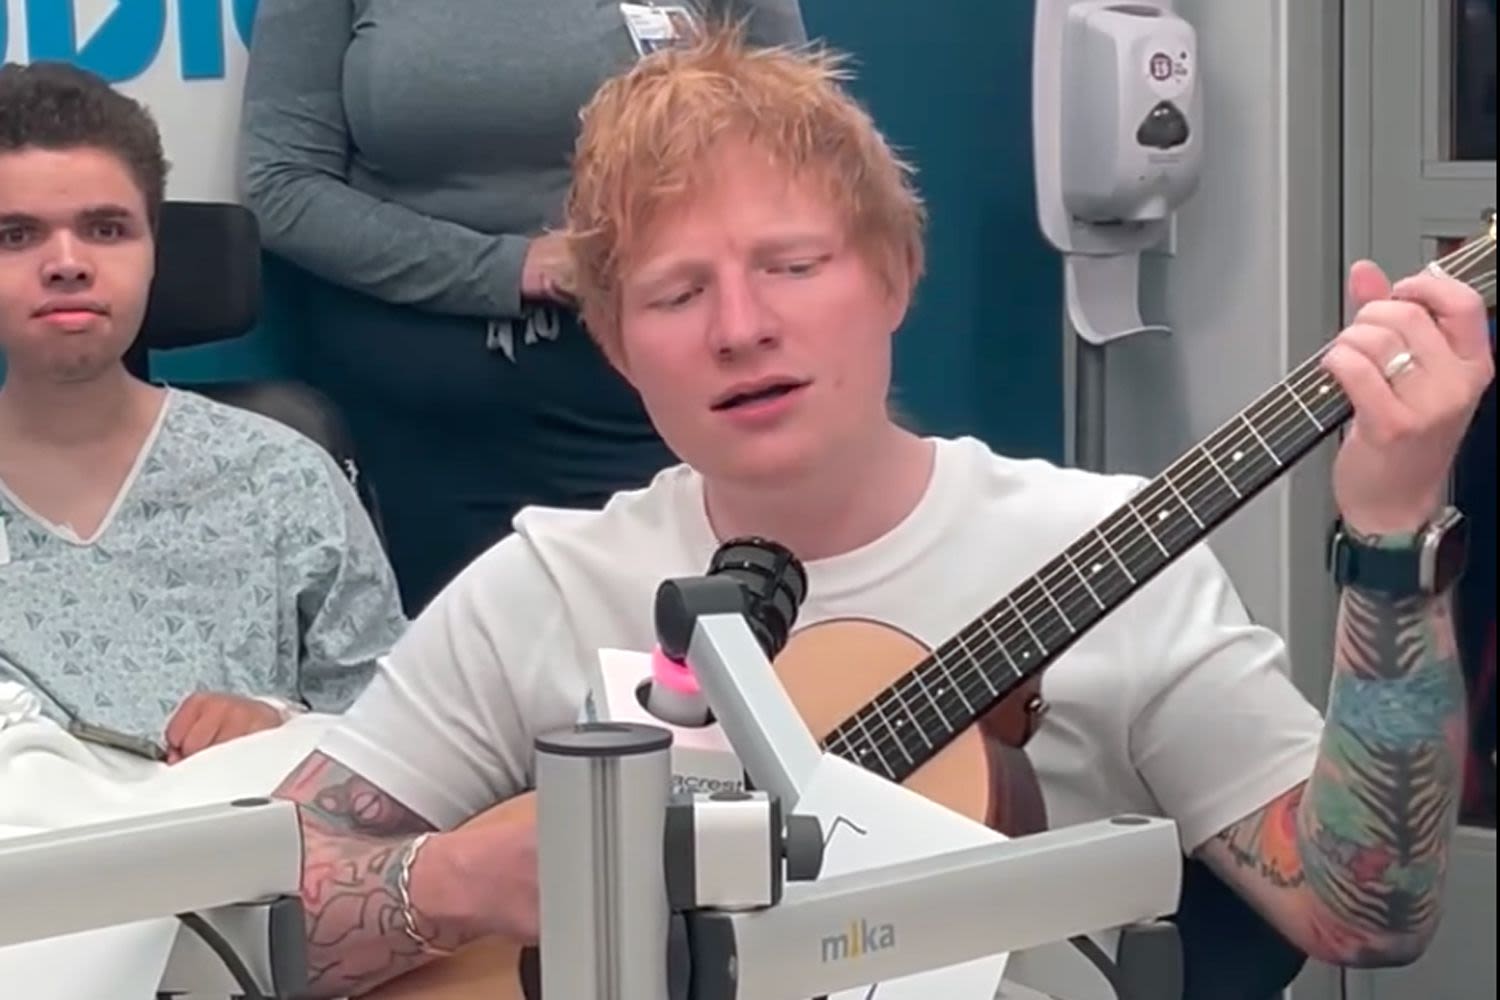 Ed Sheeran Meets with and Performs for Kids at Boston Children's Hospital Before His Boston Calling Set